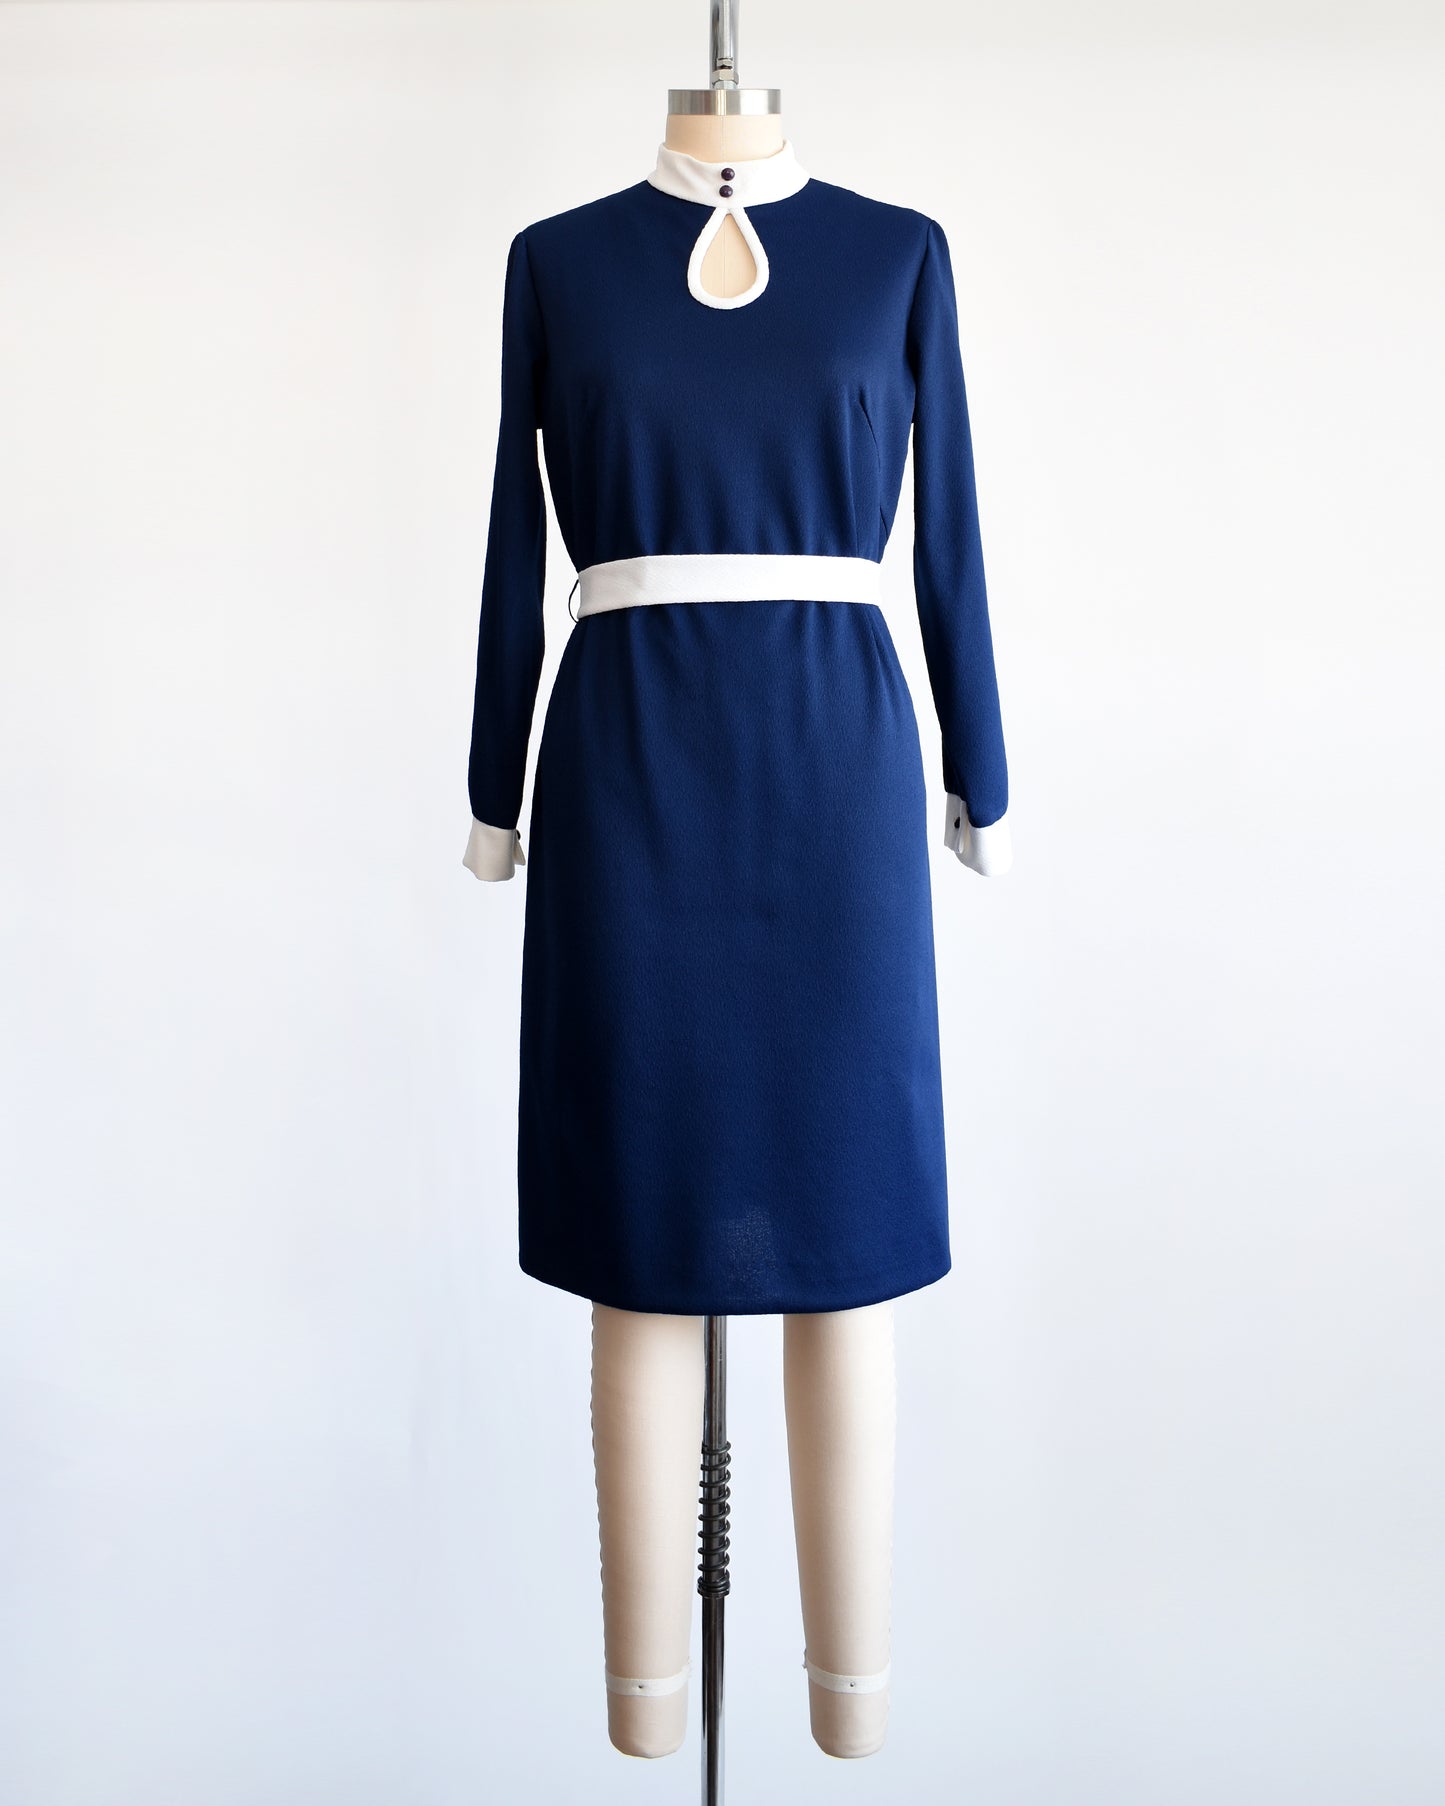 A late 1960s to early 1970s mod navy and white belted mod dress